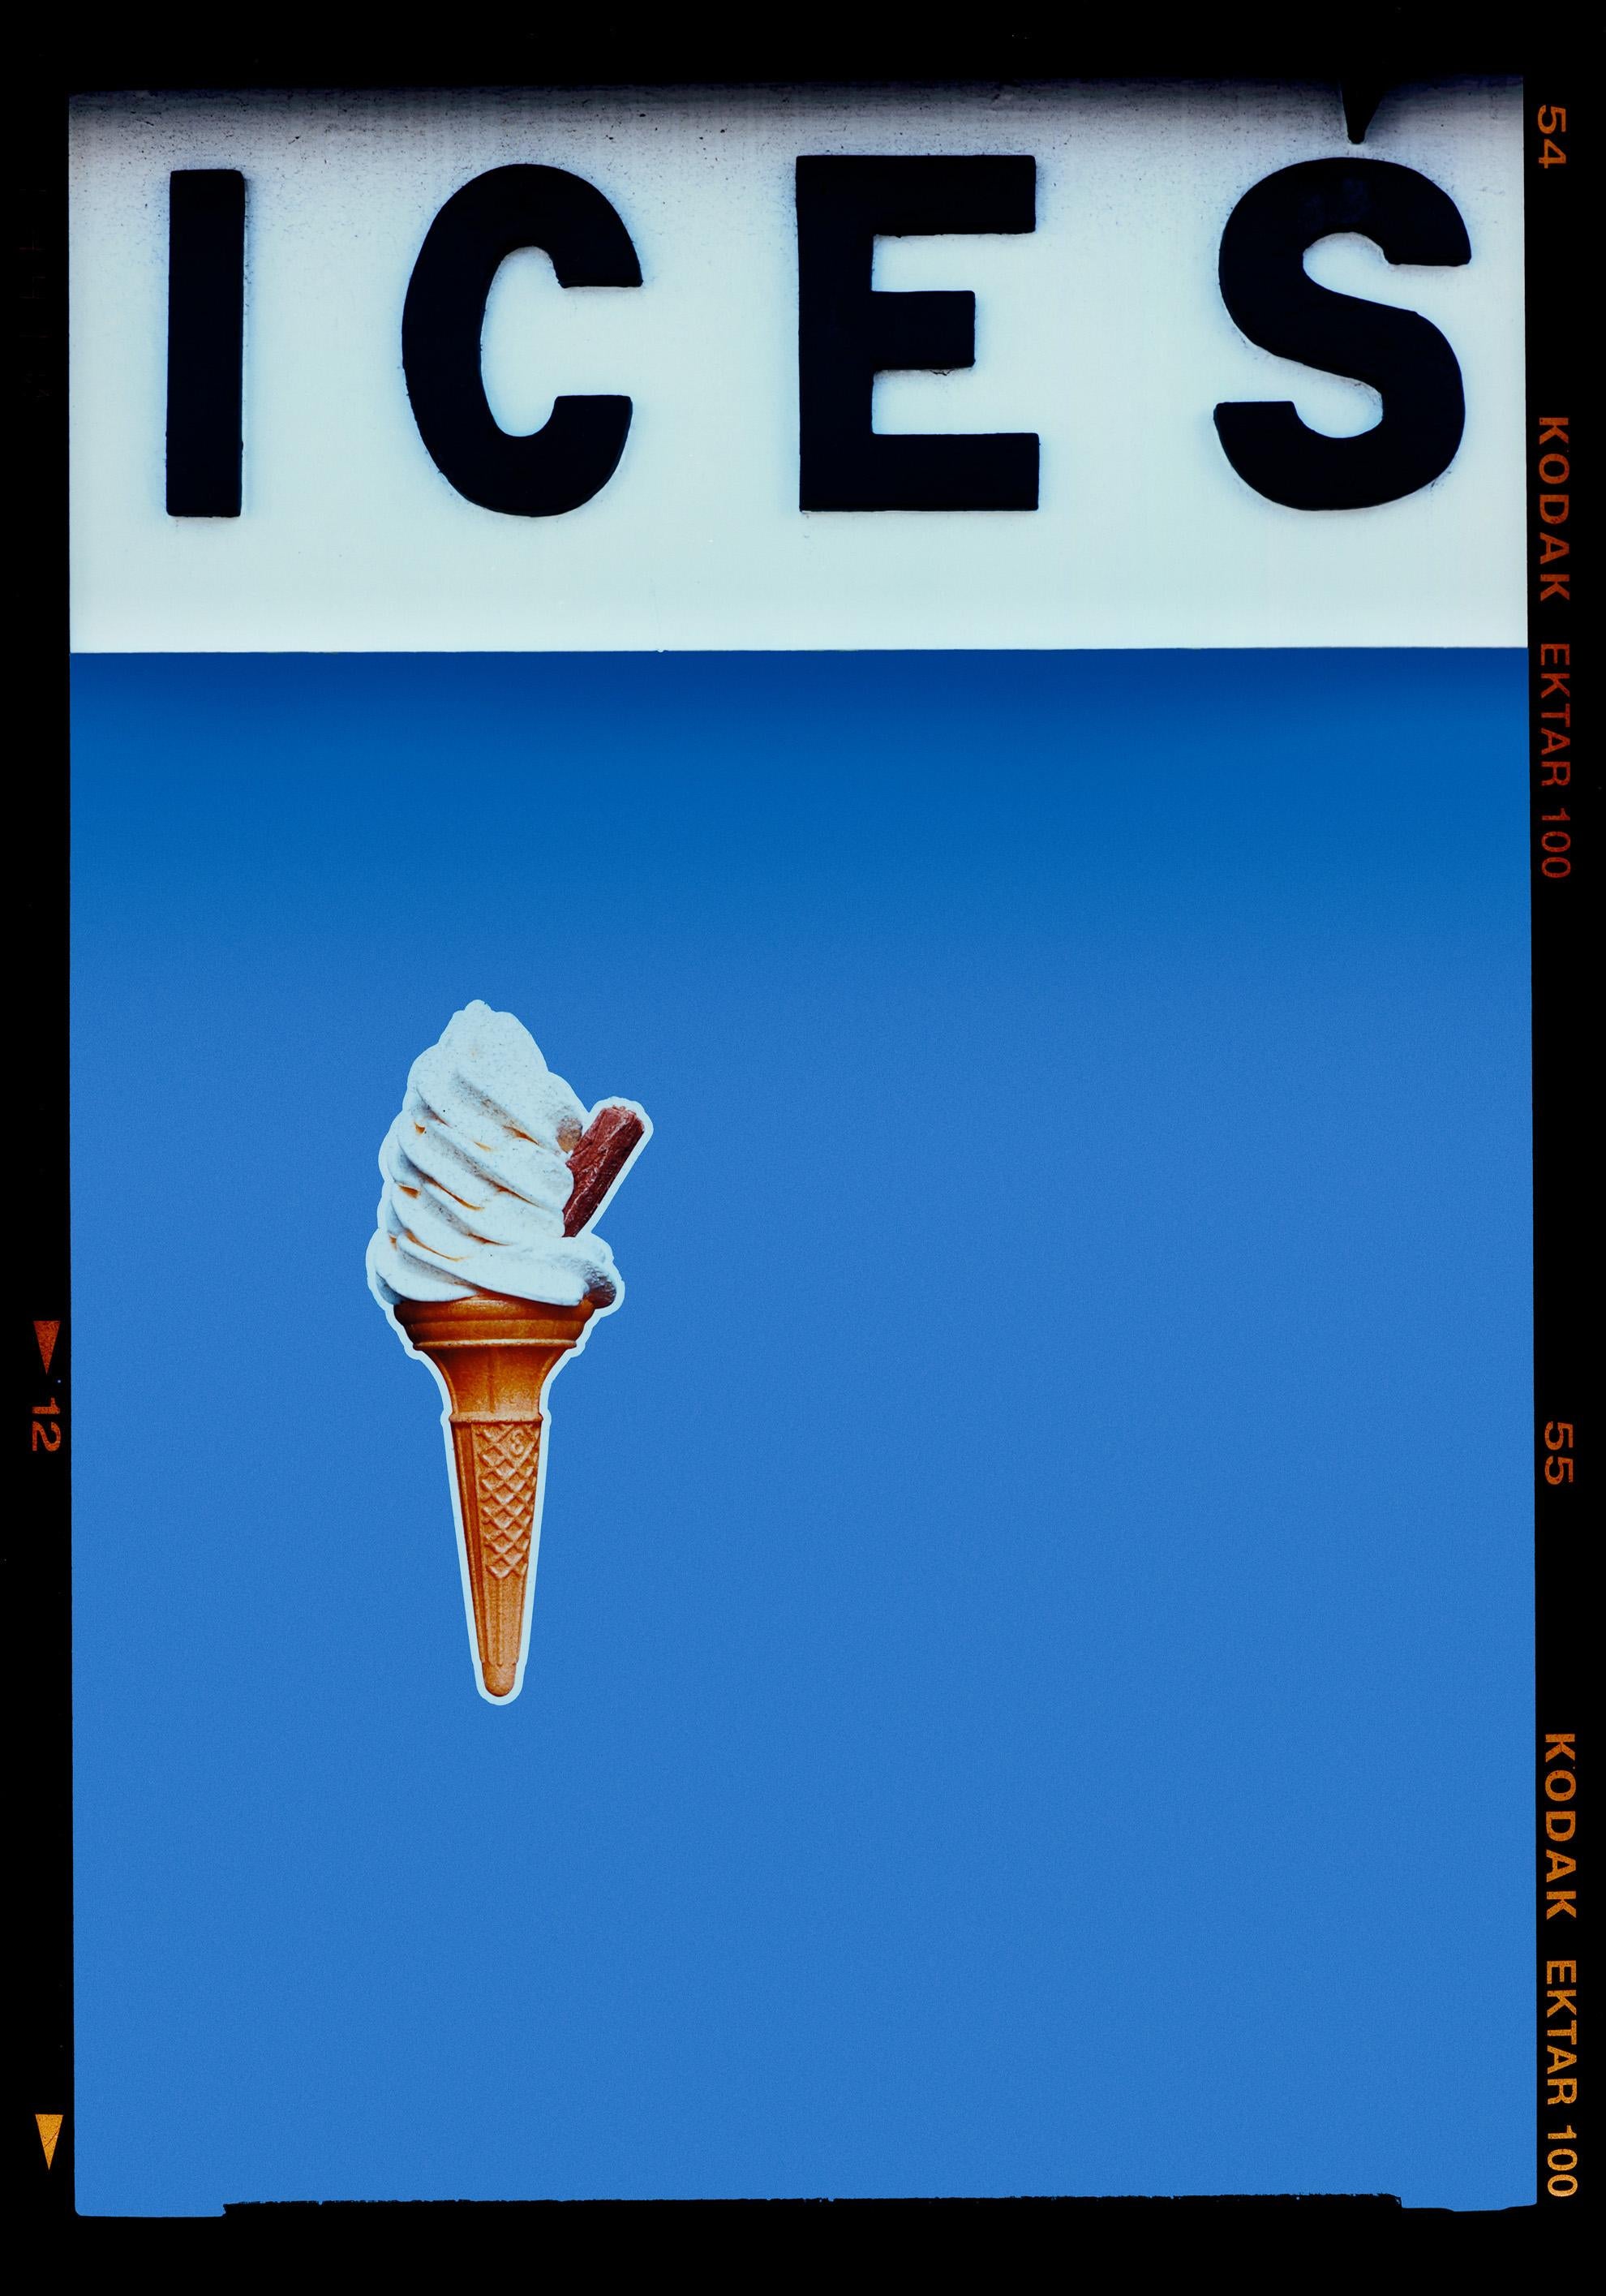 Richard Heeps Print - Ices (Baby Blue), Bexhill-on-Sea - British seaside color photography